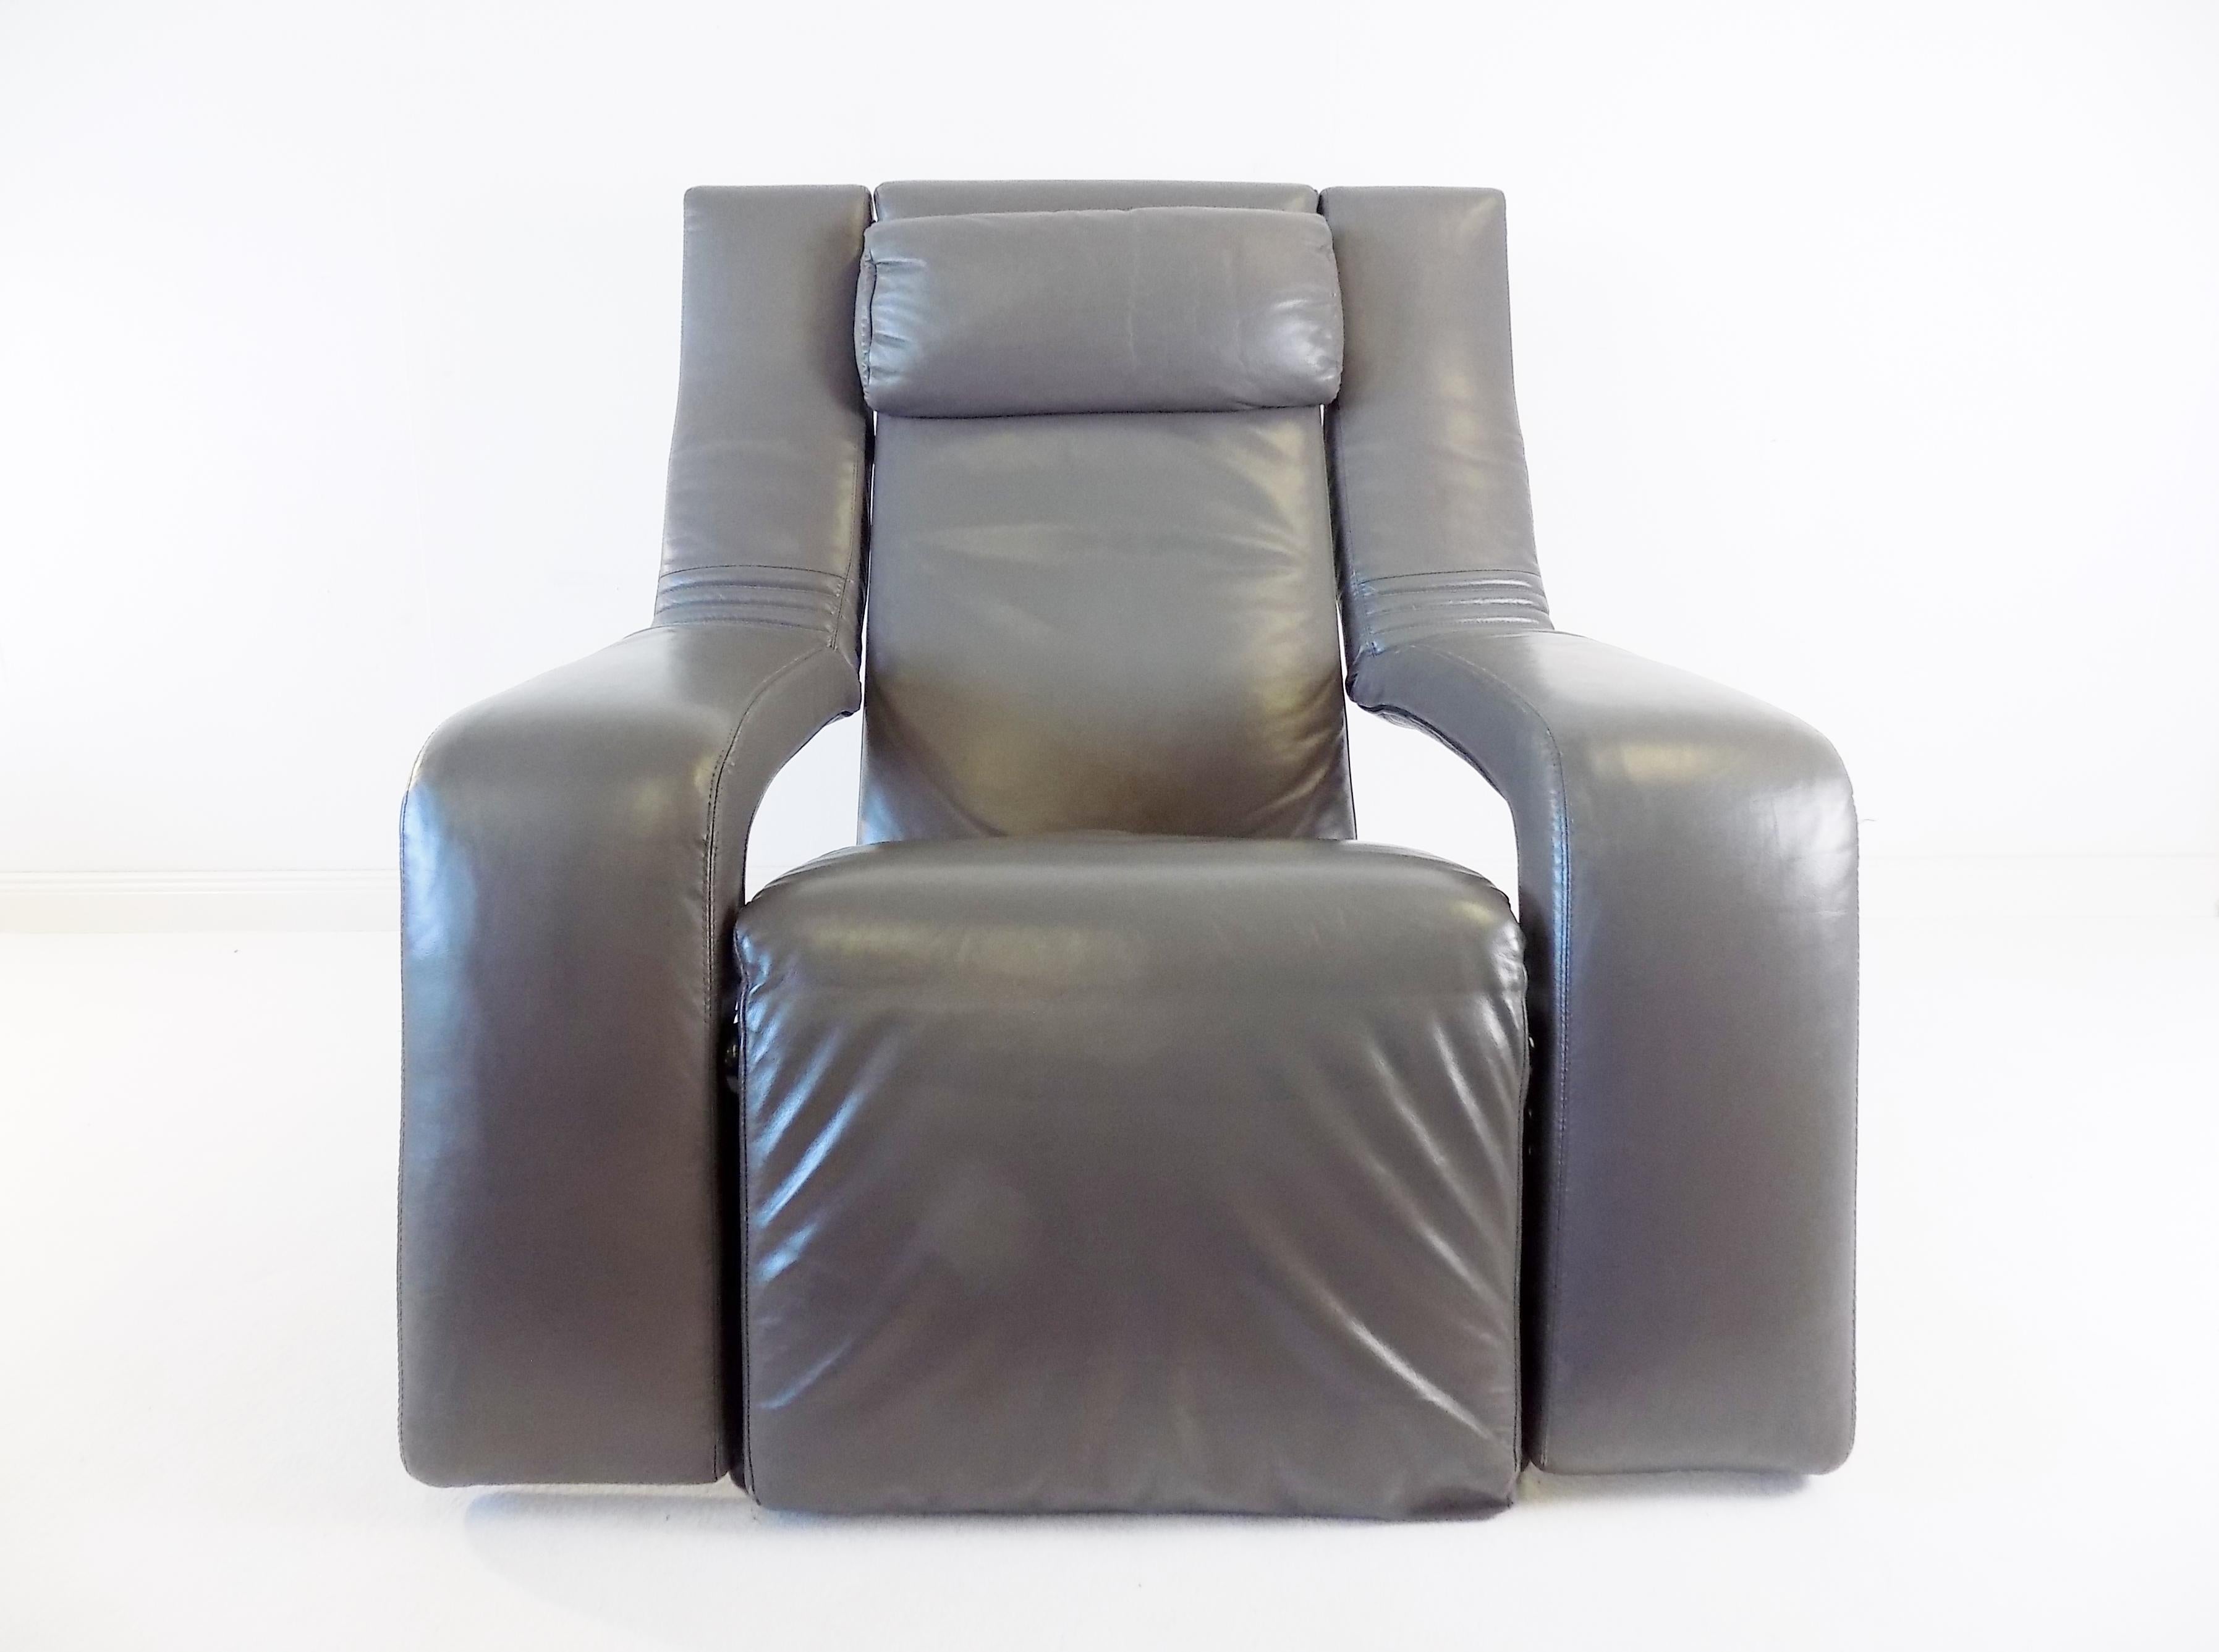 This Brunati Kilkis lounge chair in gray leather is in good condition. The fine, soft leather shows slight signs of wear at the upper corners, the upholstery is perfect. The armchair can be moved backwards with a lever, the footrest adjusts upwards